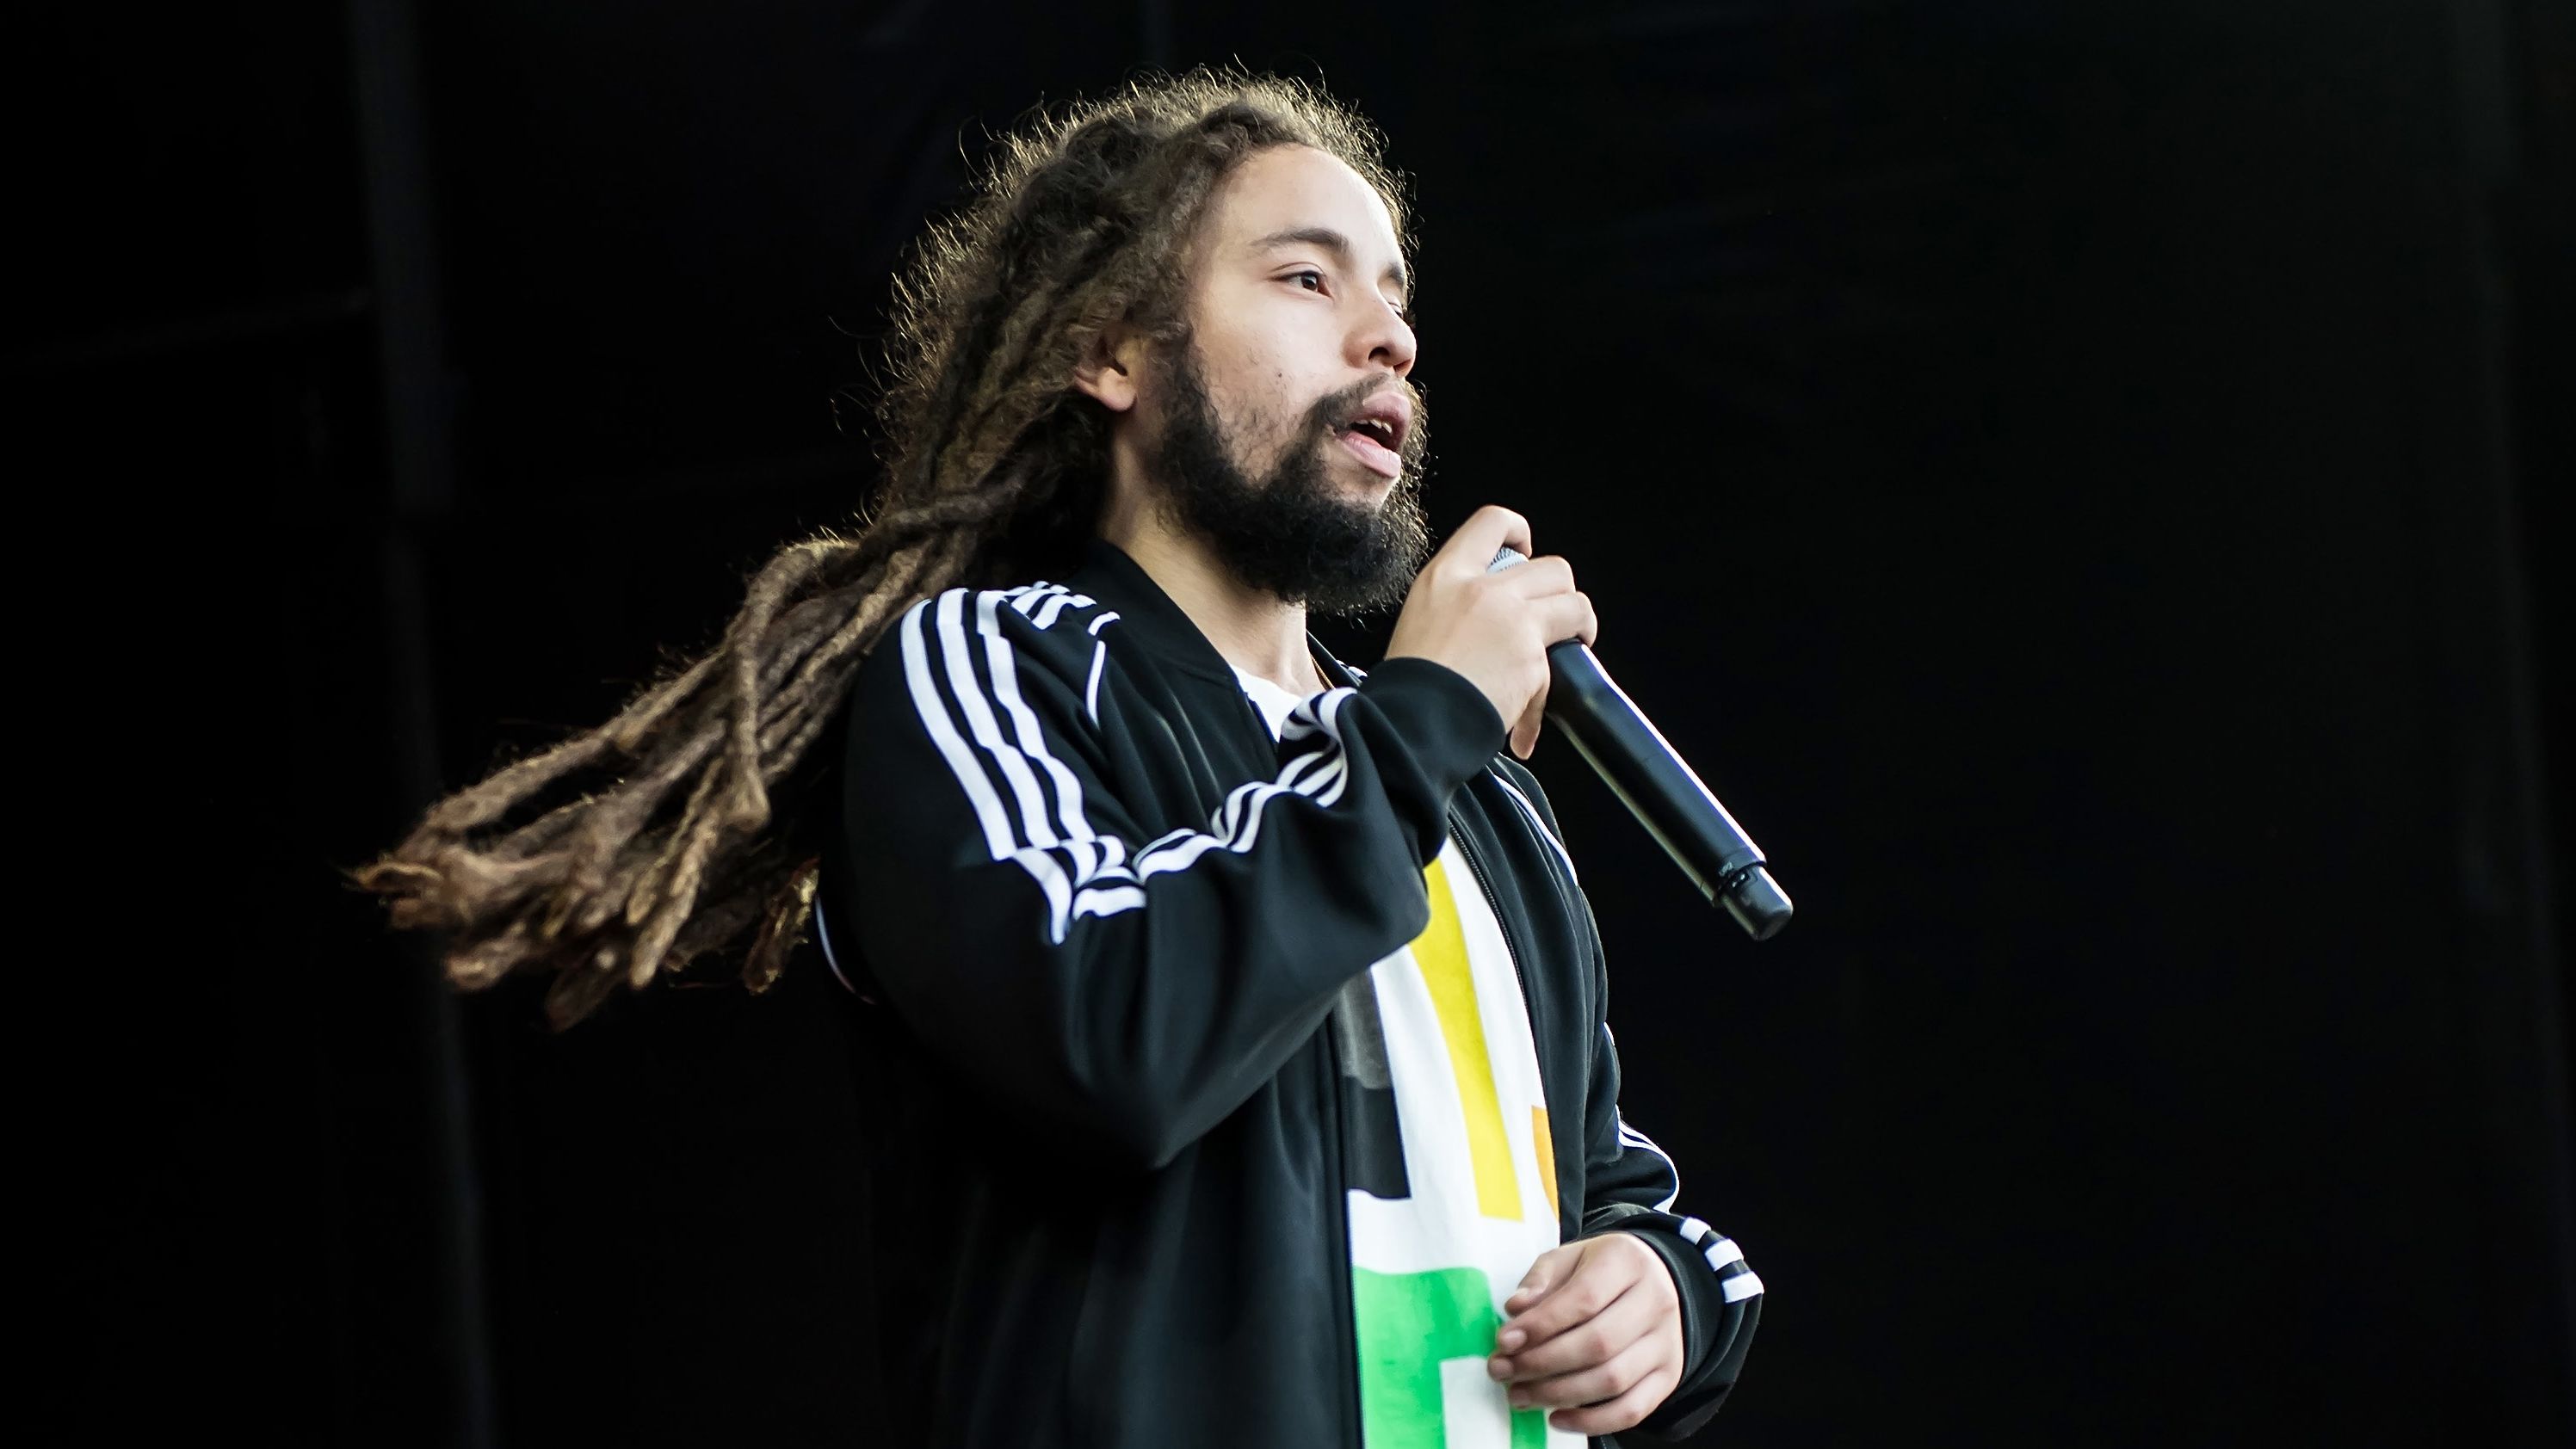 <a href="https://www.cnn.com/2022/12/29/entertainment/jo-mersa-marley-dead/index.html" target="_blank">Joseph "Jo Mersa" Marley,</a> a reggae artist who followed in the footsteps of his father, musician Stephen Marley, and his grandfather, the late reggae star Bob Marley, died at the age of 31, Miami police told CNN. Marley was found dead inside his parked vehicle in Miami on Monday, December 26. Police are investigating his death but said they do not suspect foul play. 